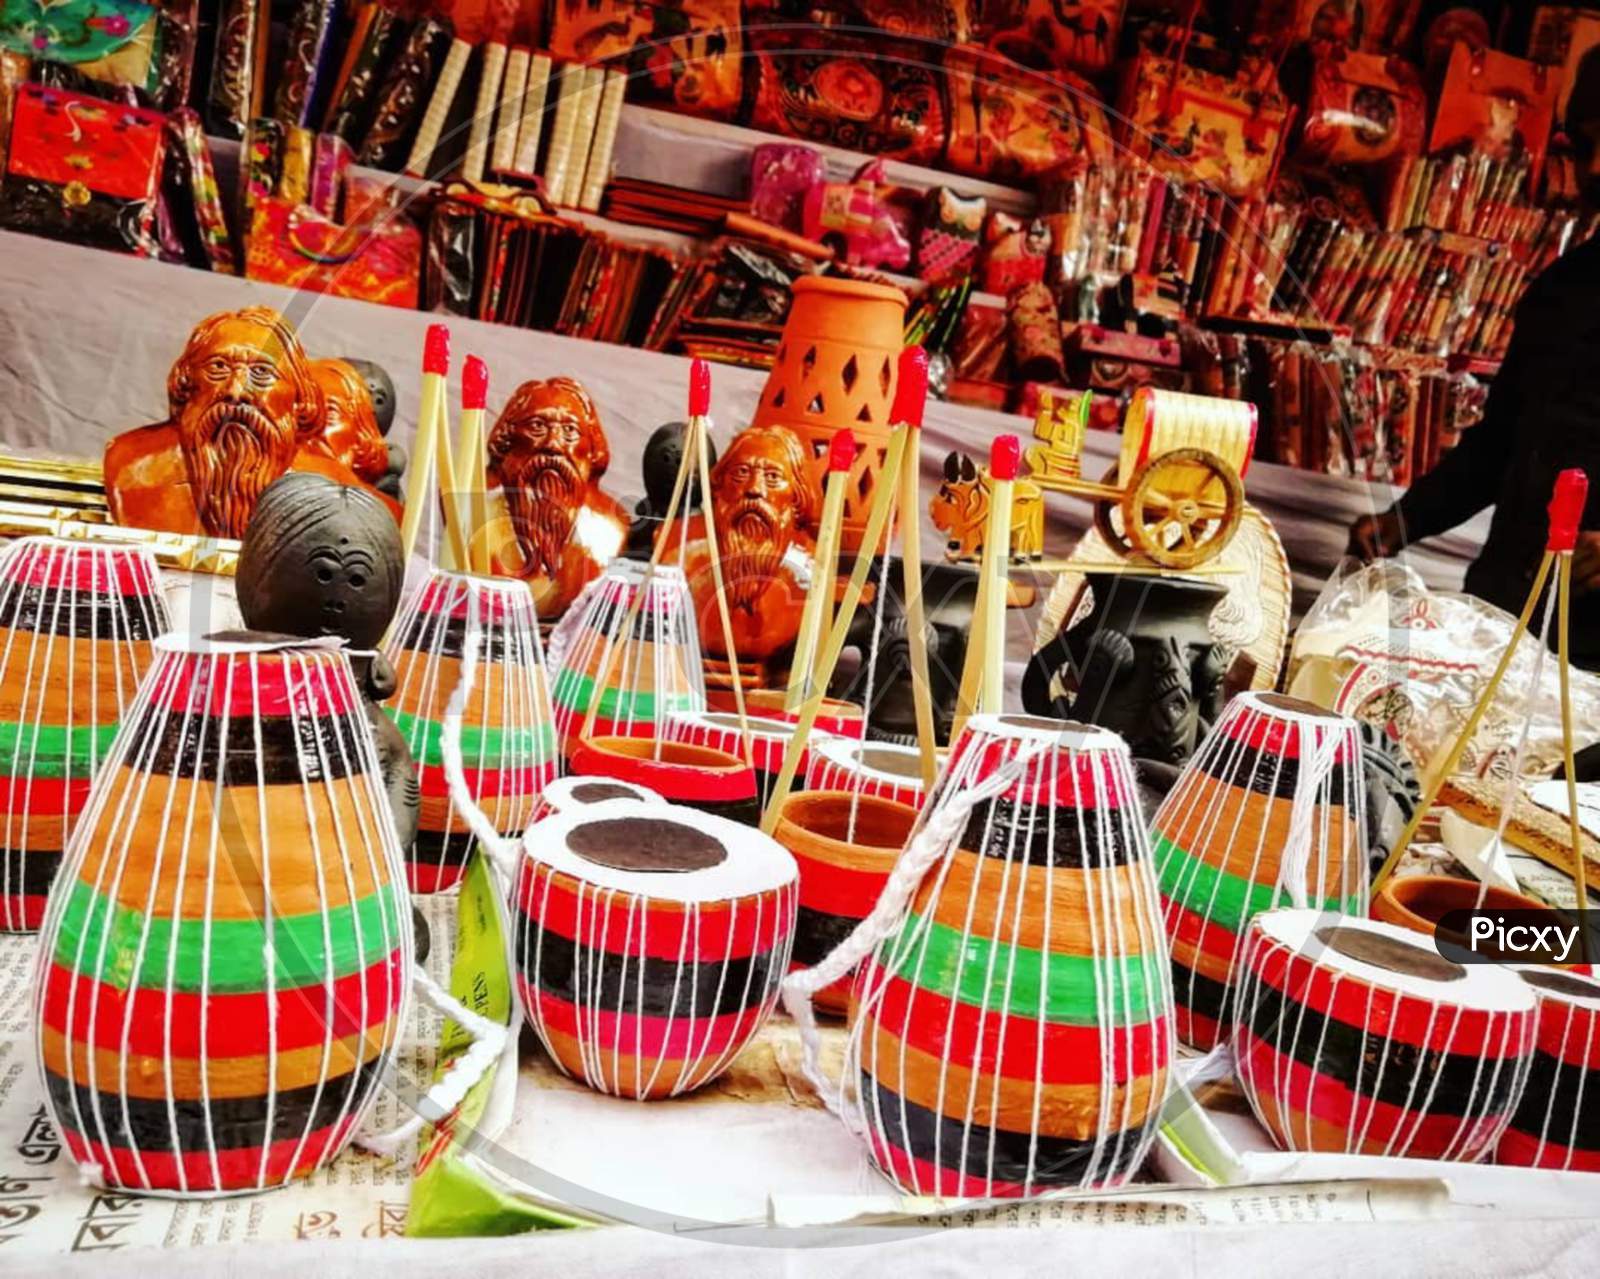 Wooden toys for sale in market colorful